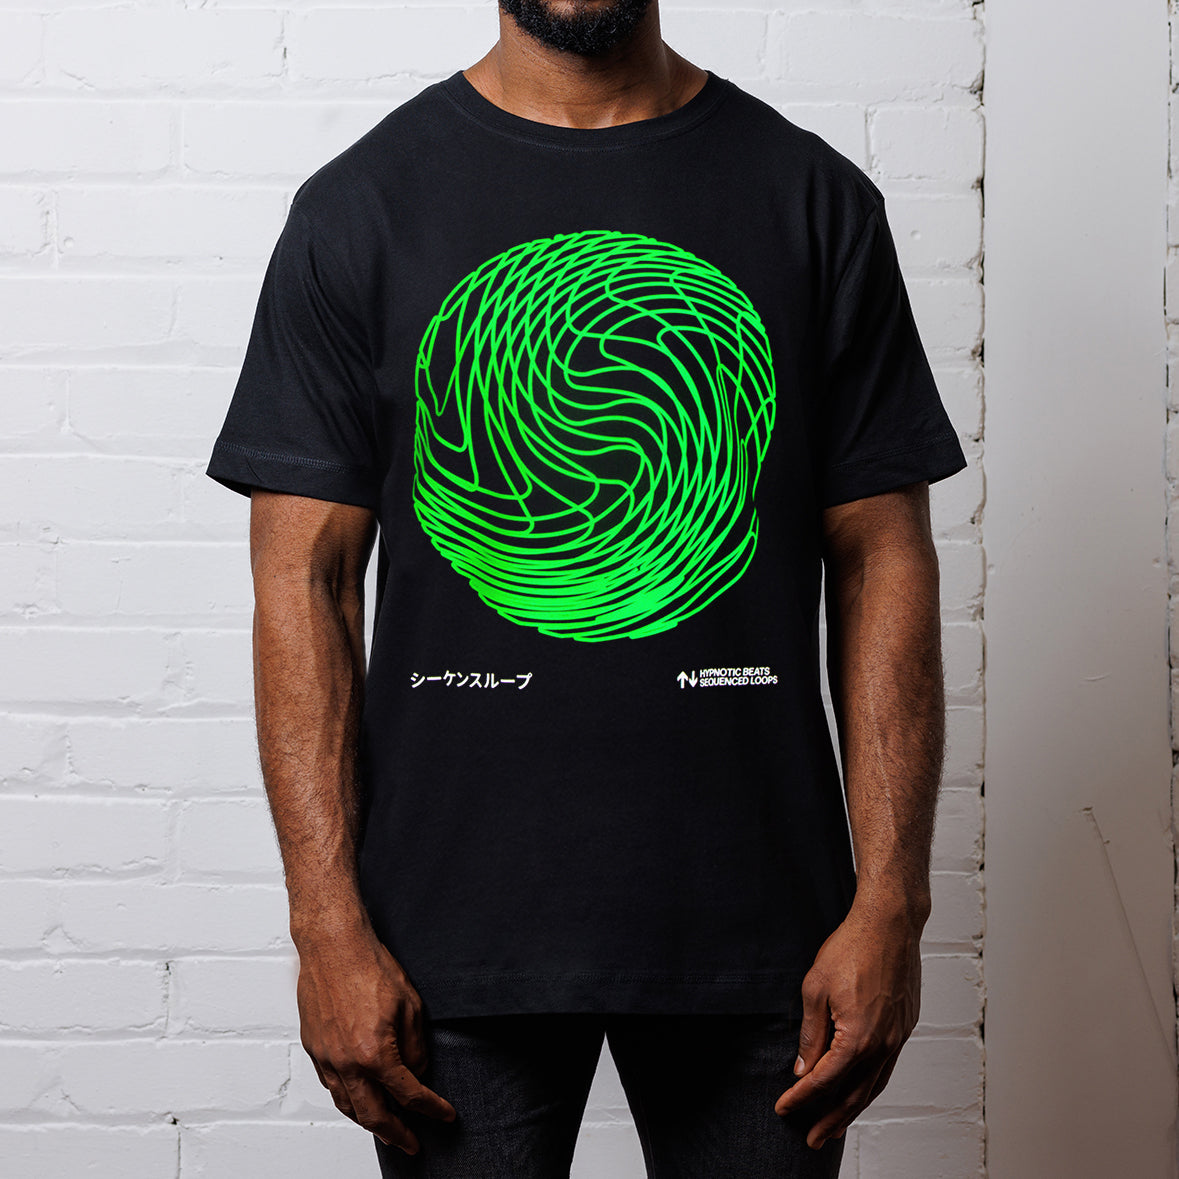 Sequence Sphere Front Print - Tshirt - Black